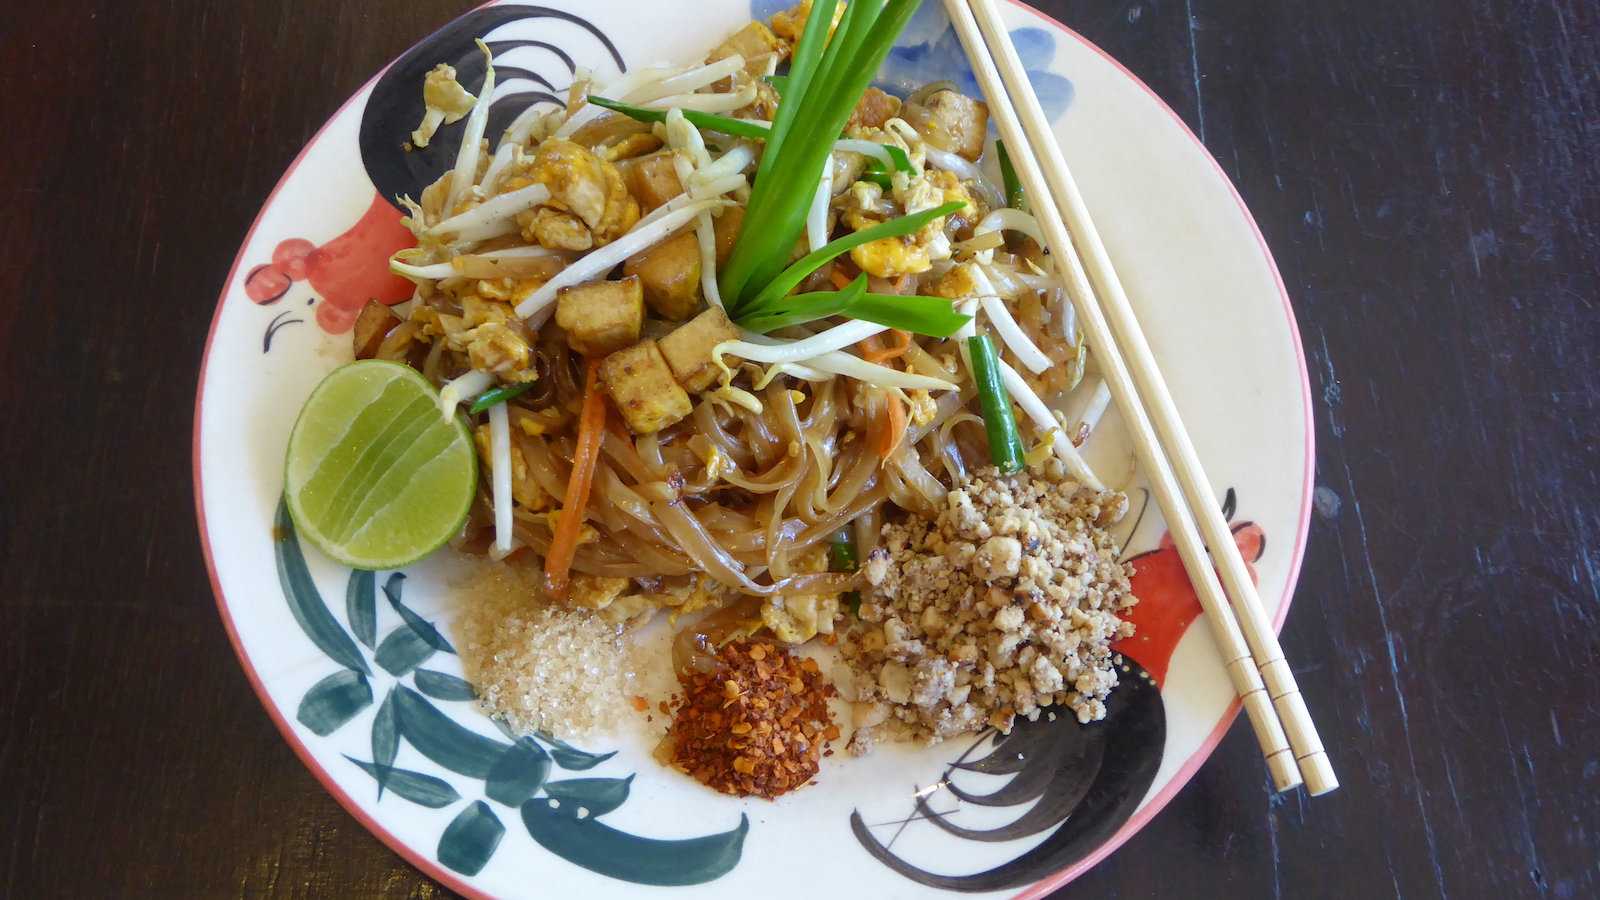 Thailand's national dish Pad Thai is delicious and easy to find all over the country